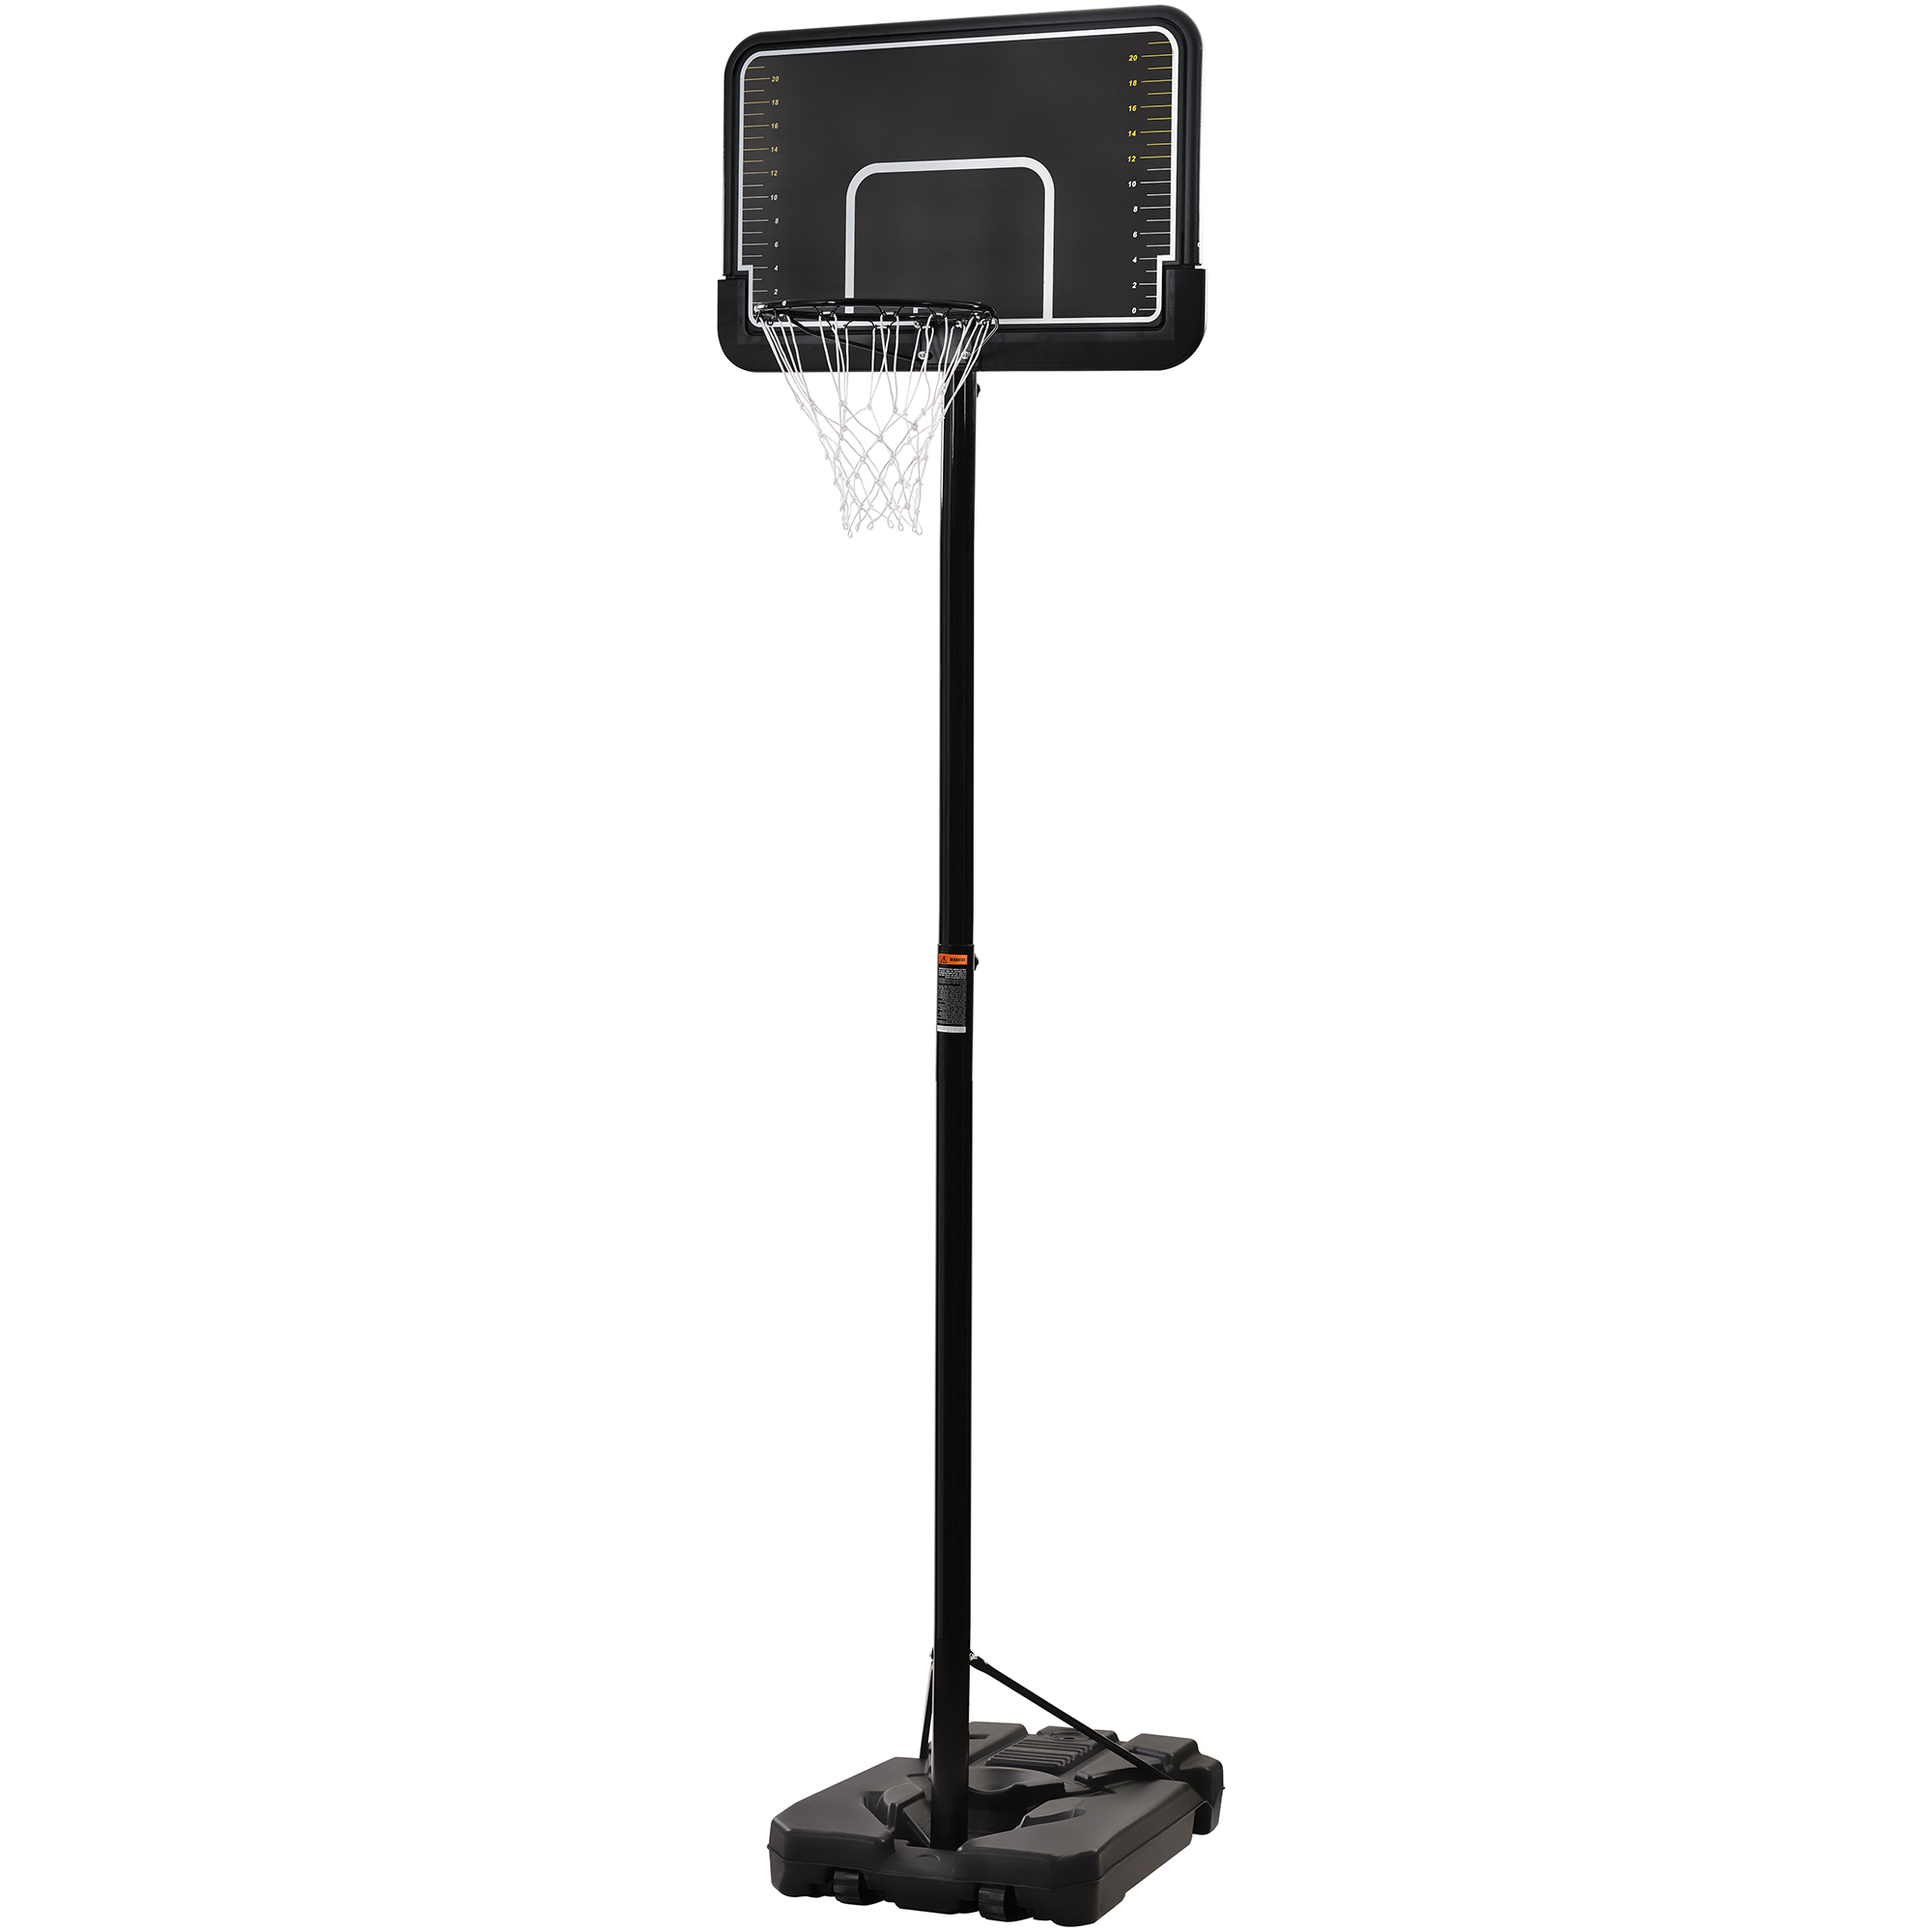 Basketball Hoop Outdoor, SEGMART 6.6ft-10ft Adjustable Basketball Hoop, Portable Basketball Hoop with Wheels, Basketball Hoop with Backboard, Outdoor Basketball Game Play Set for Adult/Teen, LLL4416 - image 5 of 10